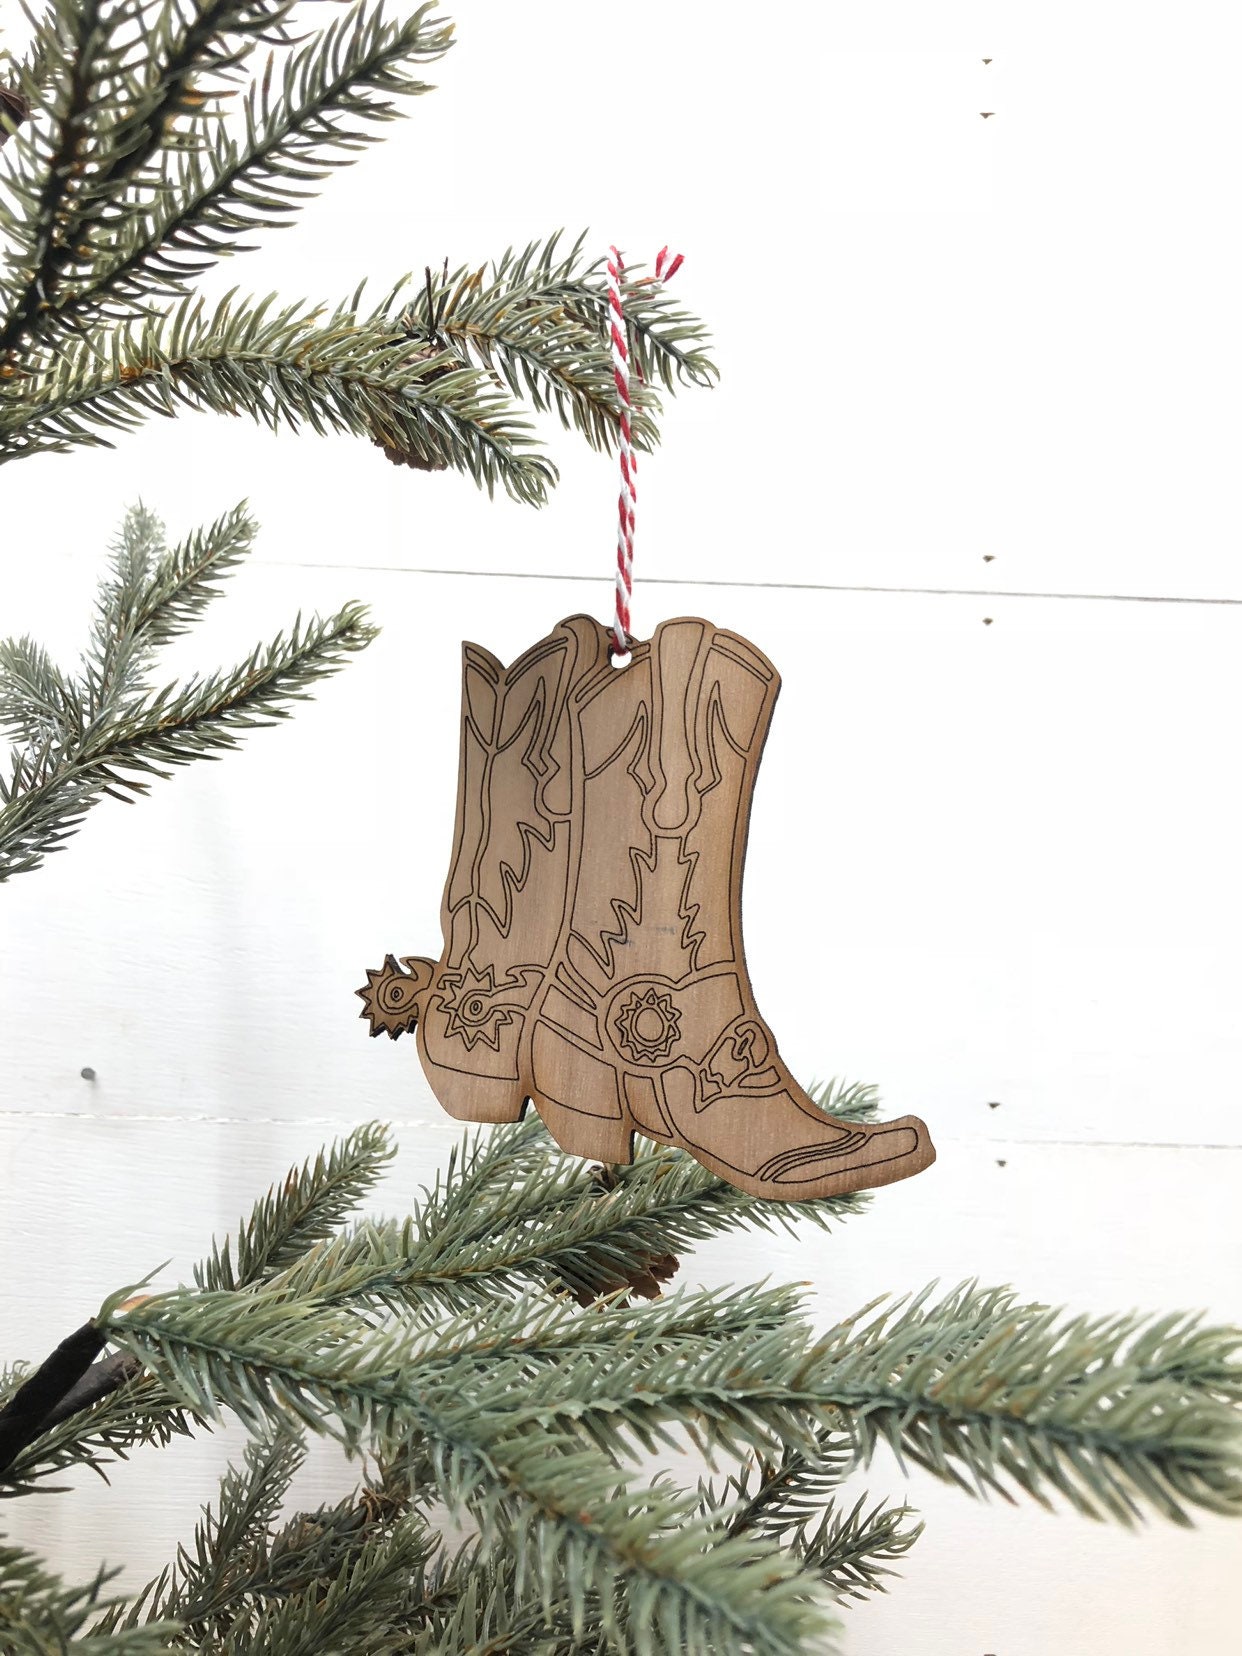 Cowboy Boots Wooden Christmas Ornament, Western Ornaments, Cowboy Ornaments, Boots and Spurs, Small Gifts, Christmas Tree, Stocking Stuffers